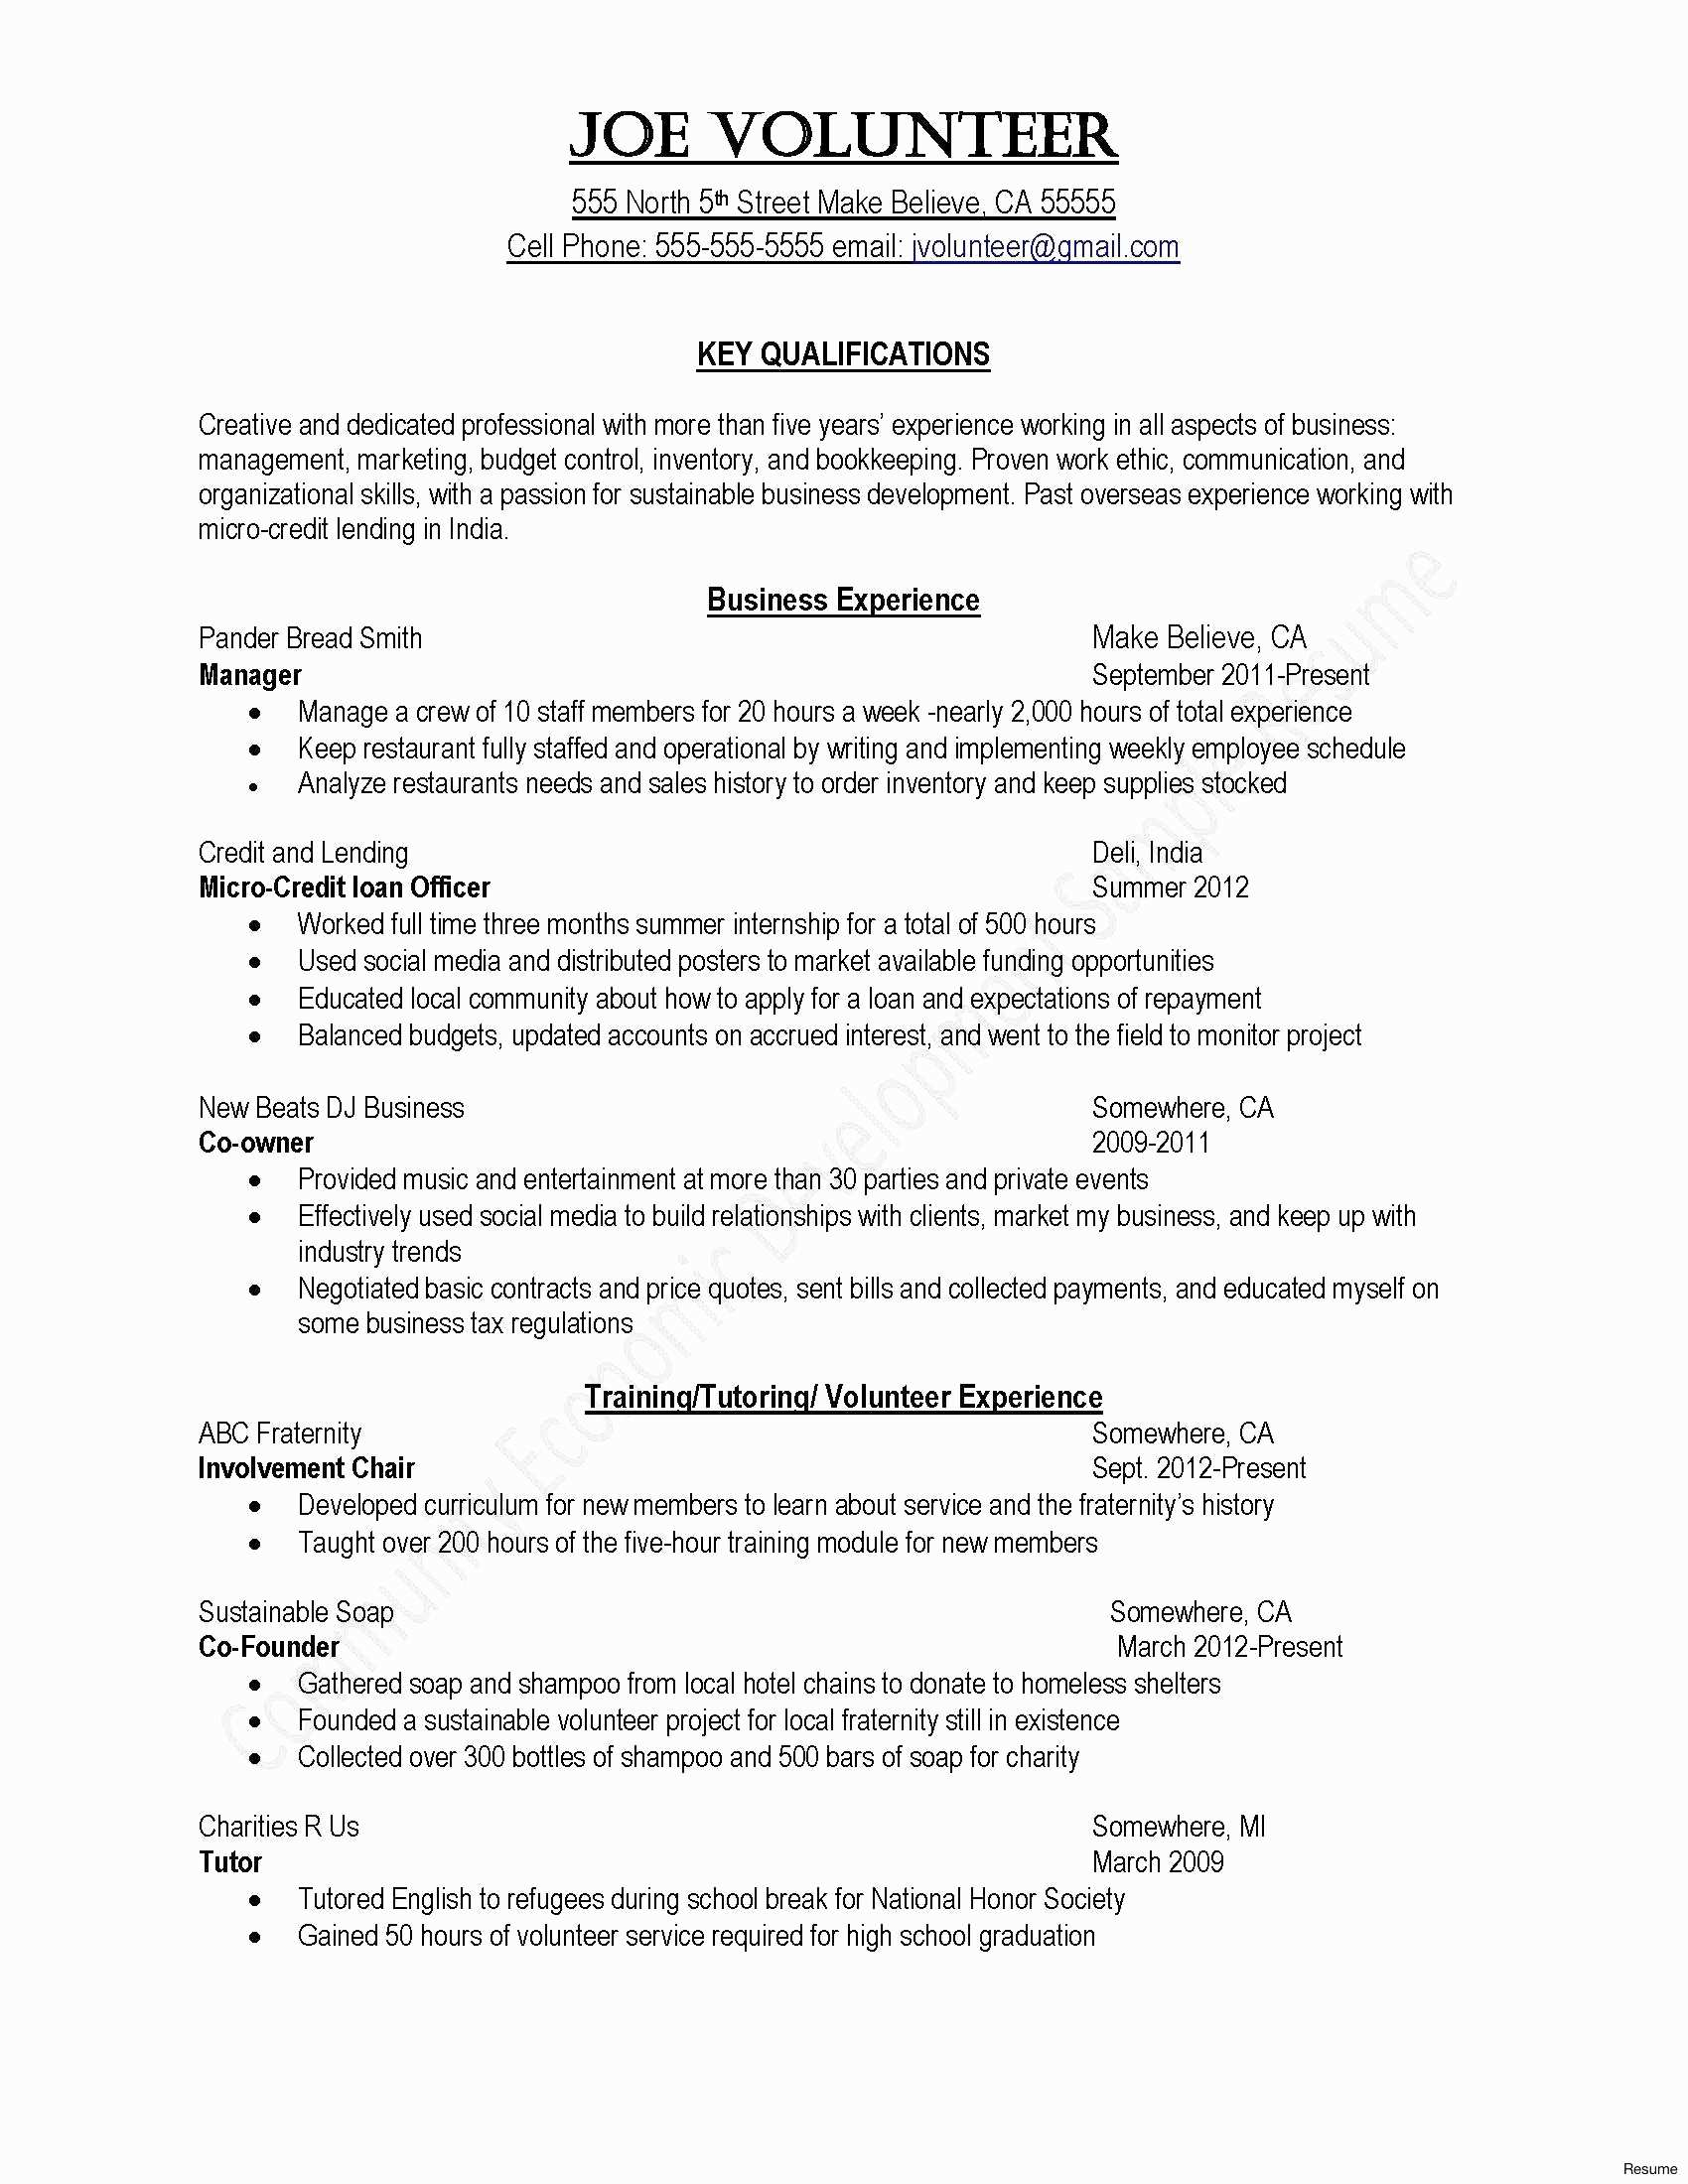 Expert Opinion Letter Template - 12 Awesome Writing Sample Cover Letter